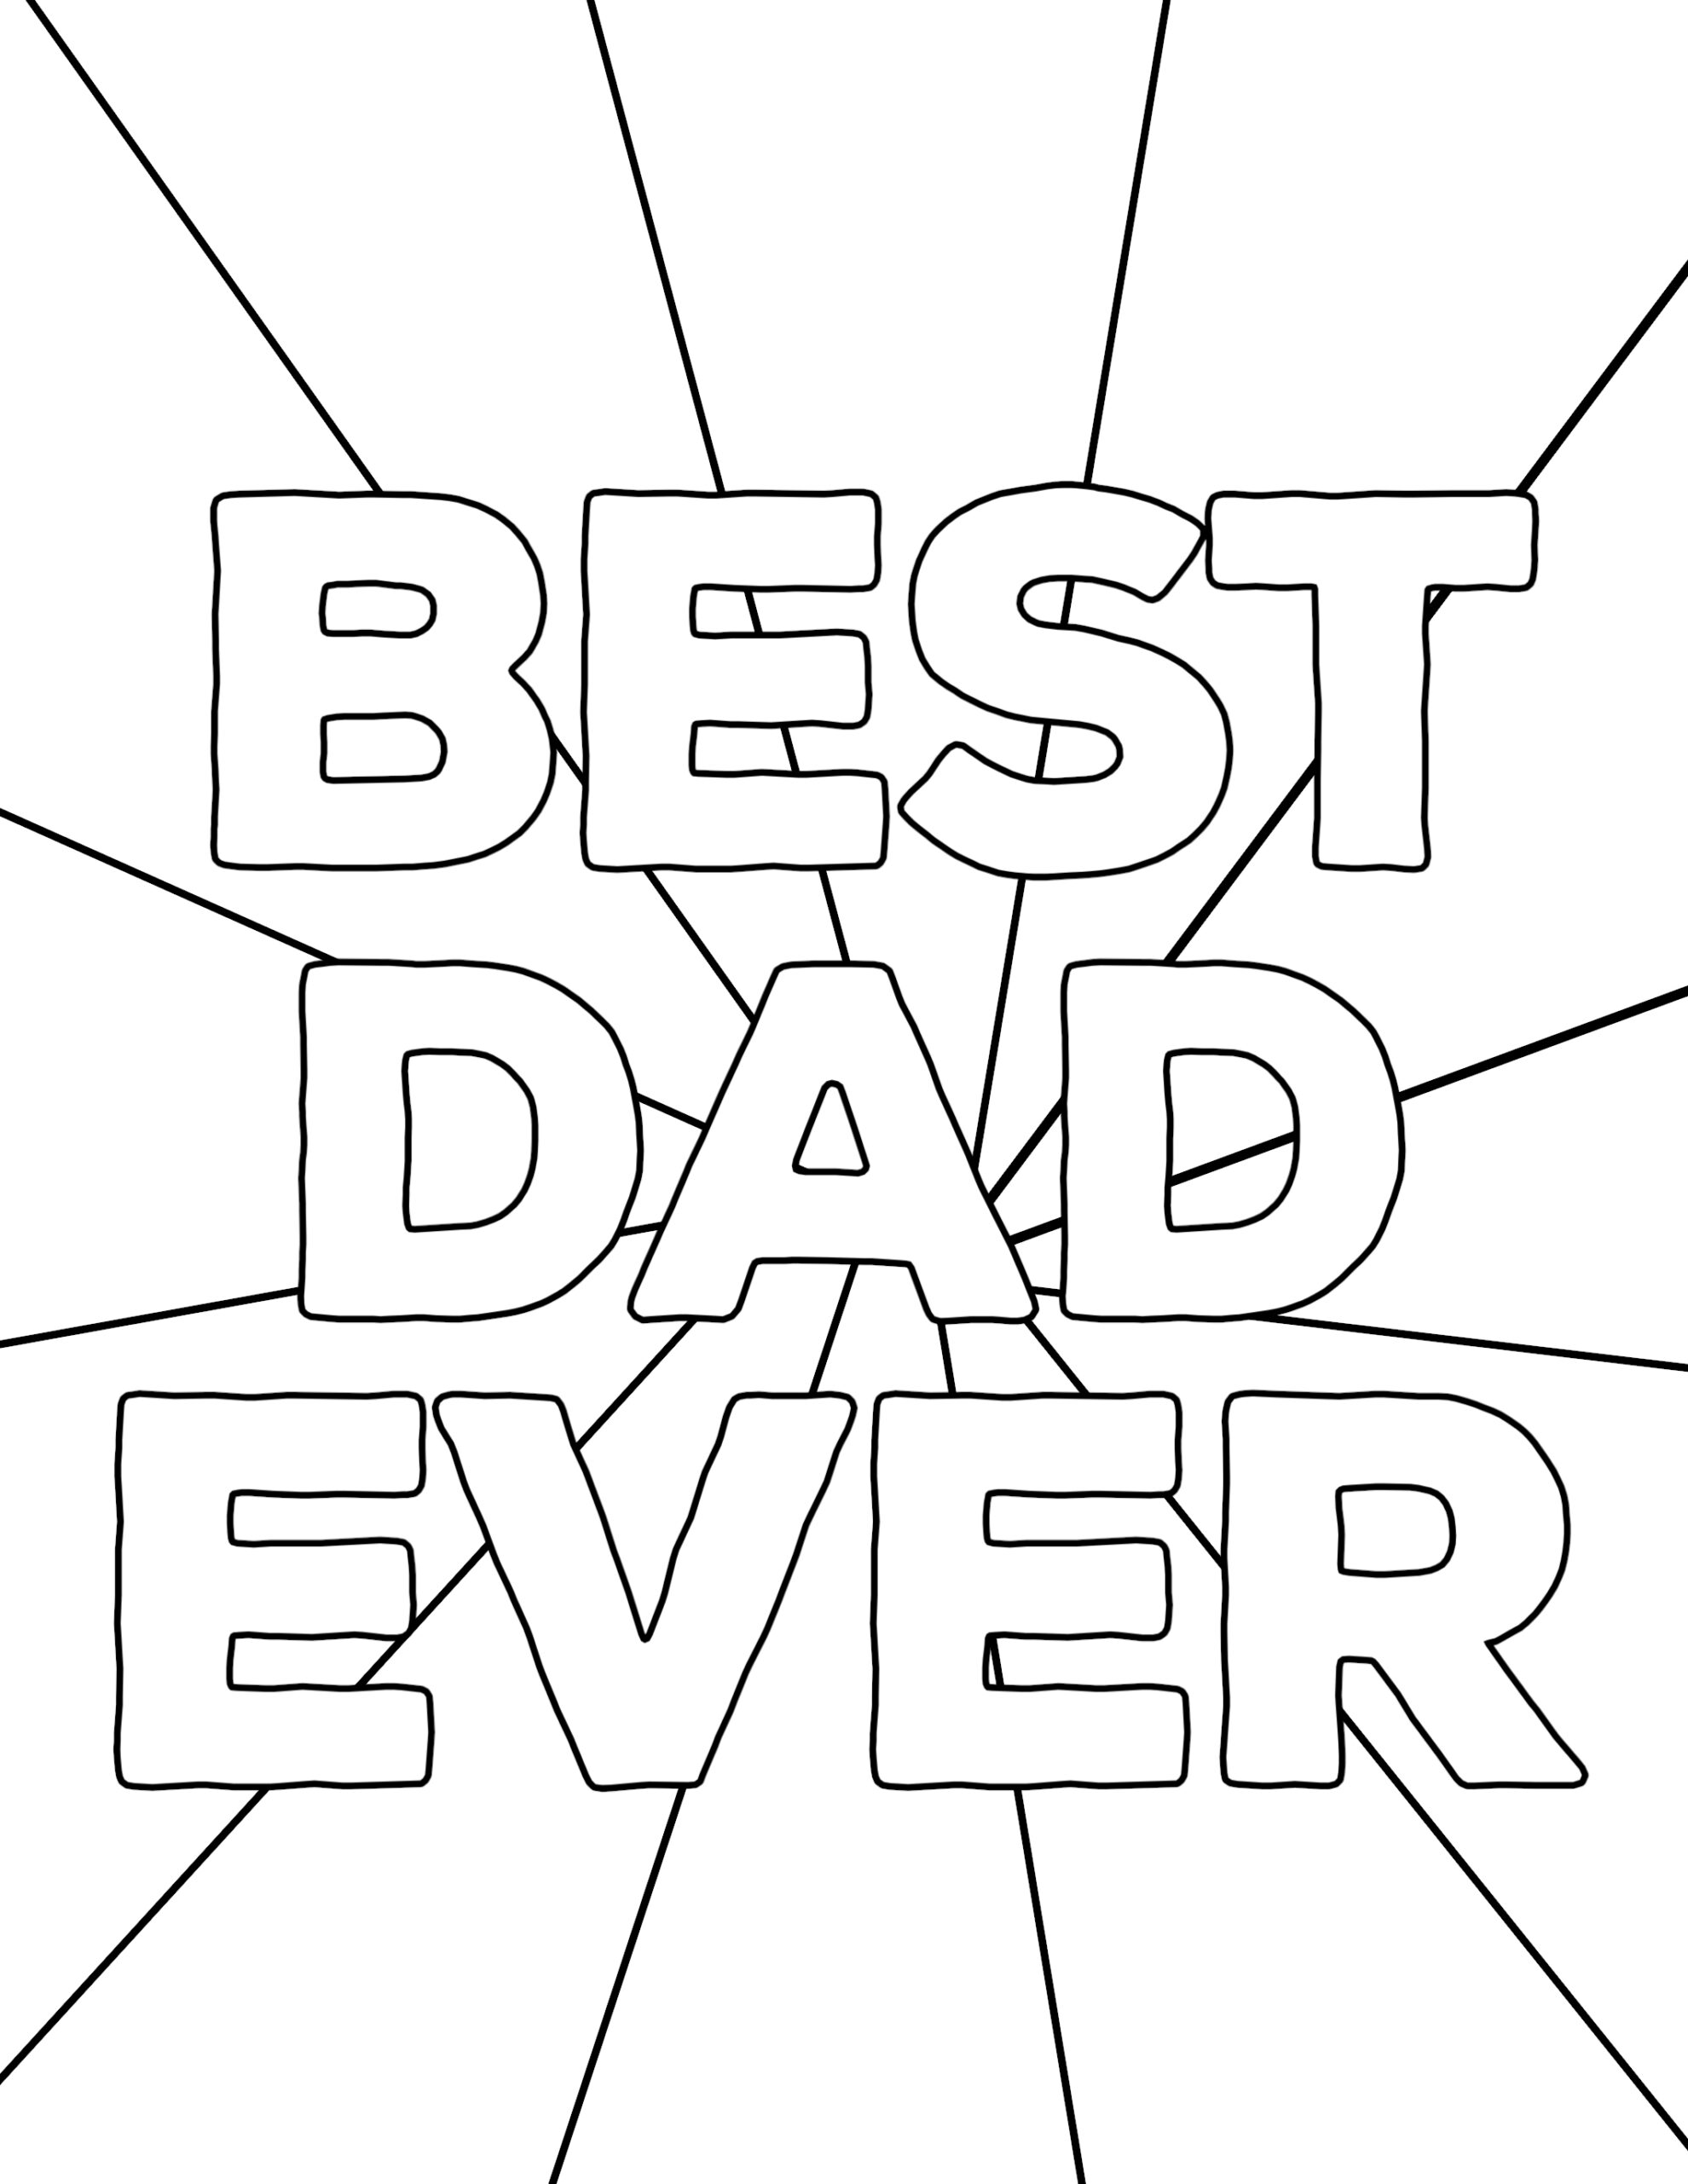 Happy Father'S Day Coloring Pages Free Printables - Paper Trail Design